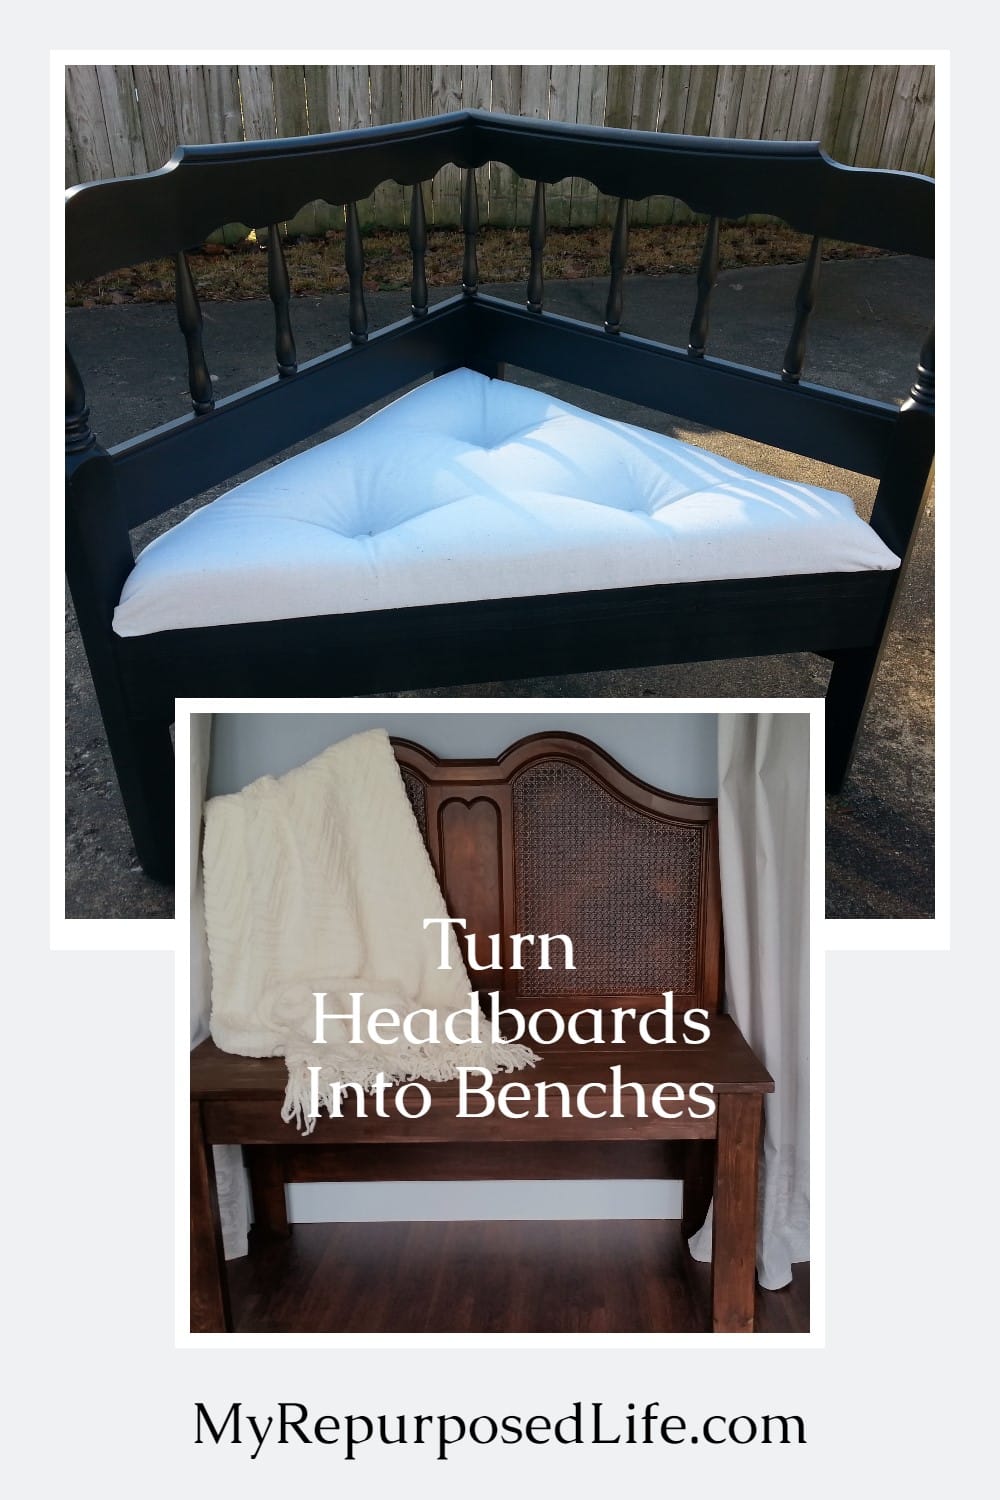 This collection of headboards turned into benches will inspire you to grab a bed and cut it up. Many of these can be constructed in an afternoon with included step by step instructions. via @repurposedlife